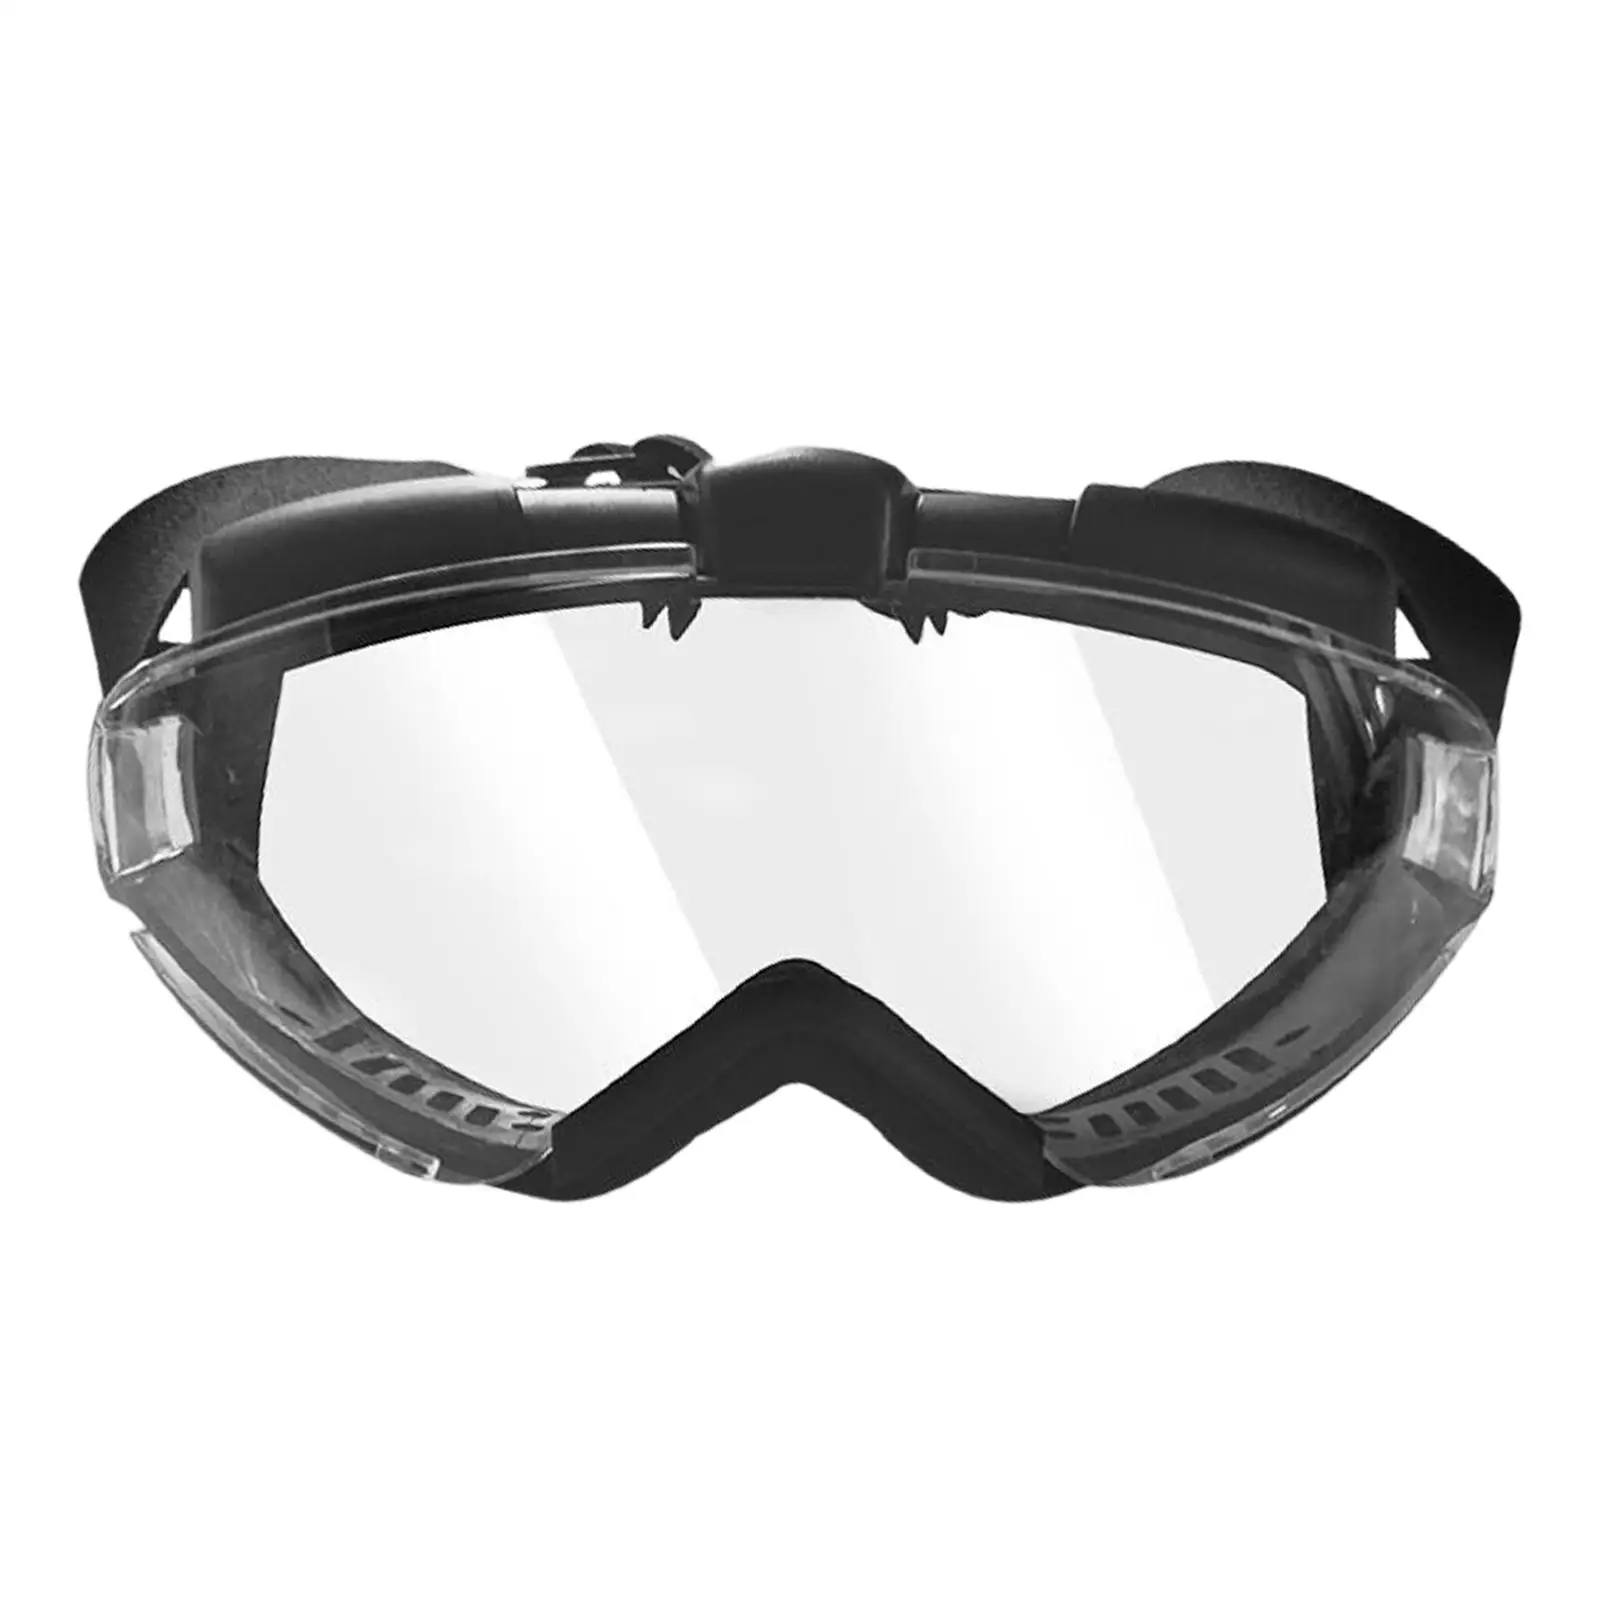 Outdoor Glasses Windproof with Adjustable Strap Eye Protection Goggles Unisex Dustproof for Ski Cycling Skiing Camping Fishing